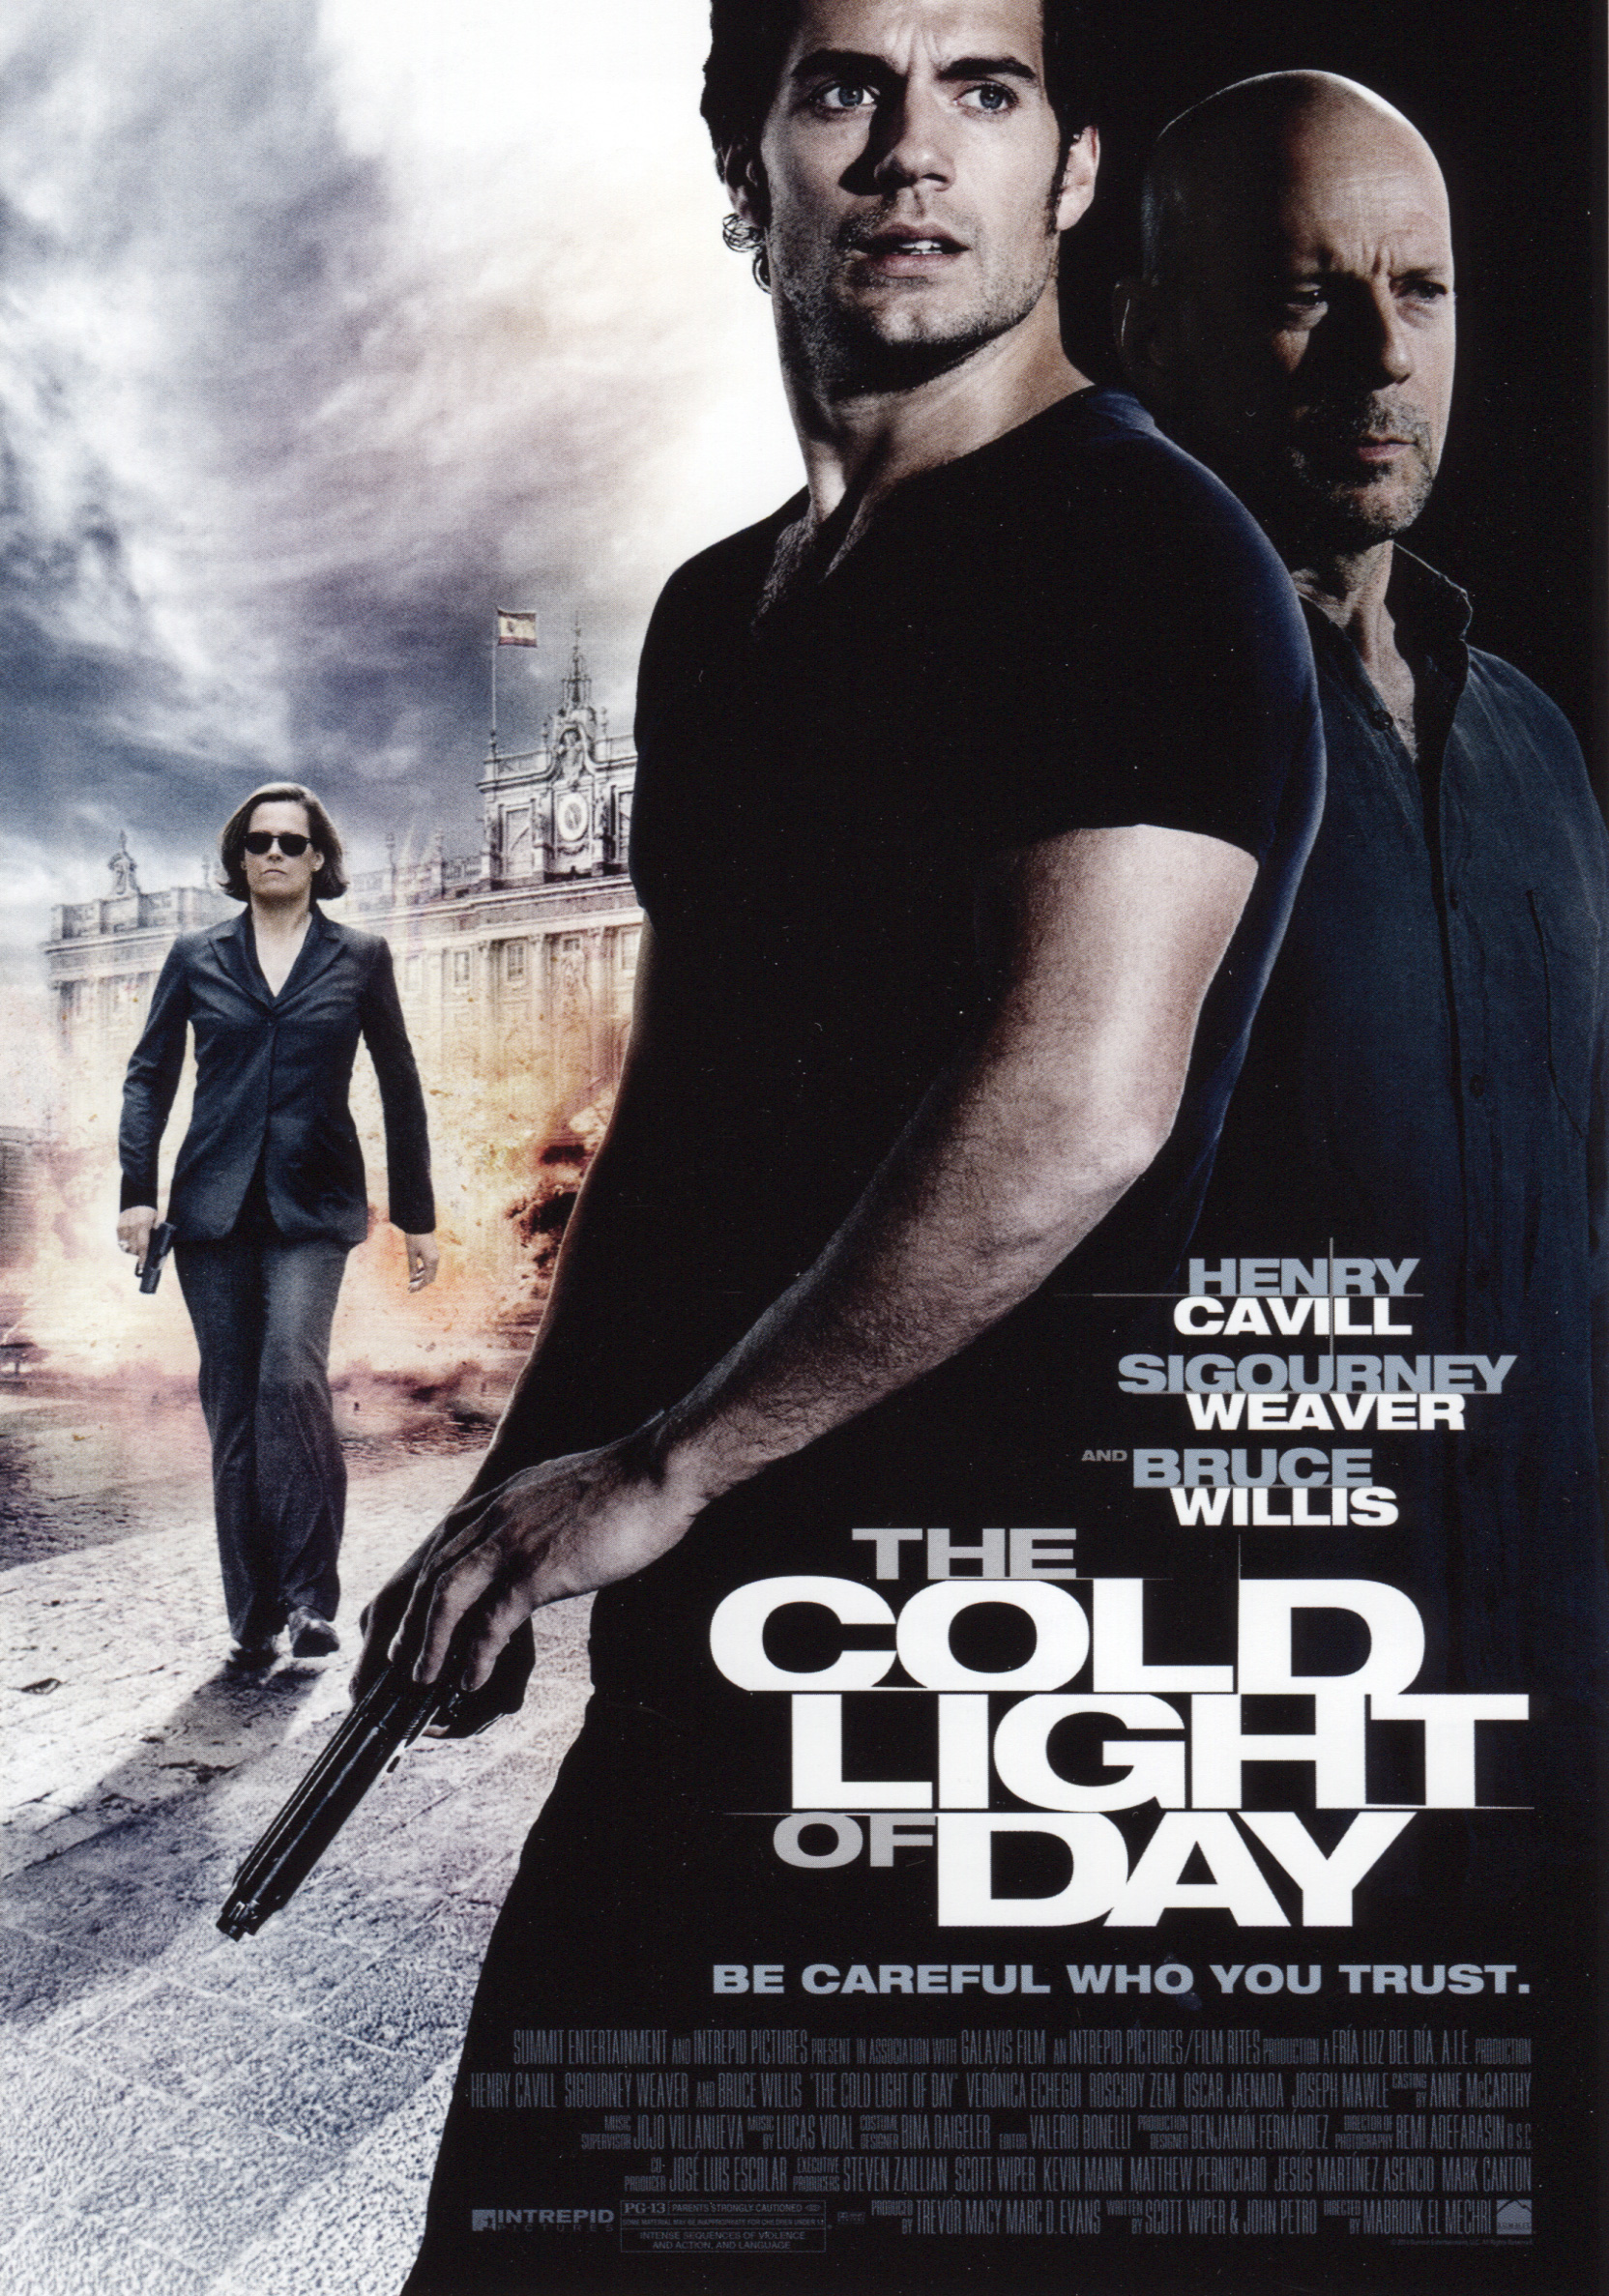 The Cold Light Of Day poster